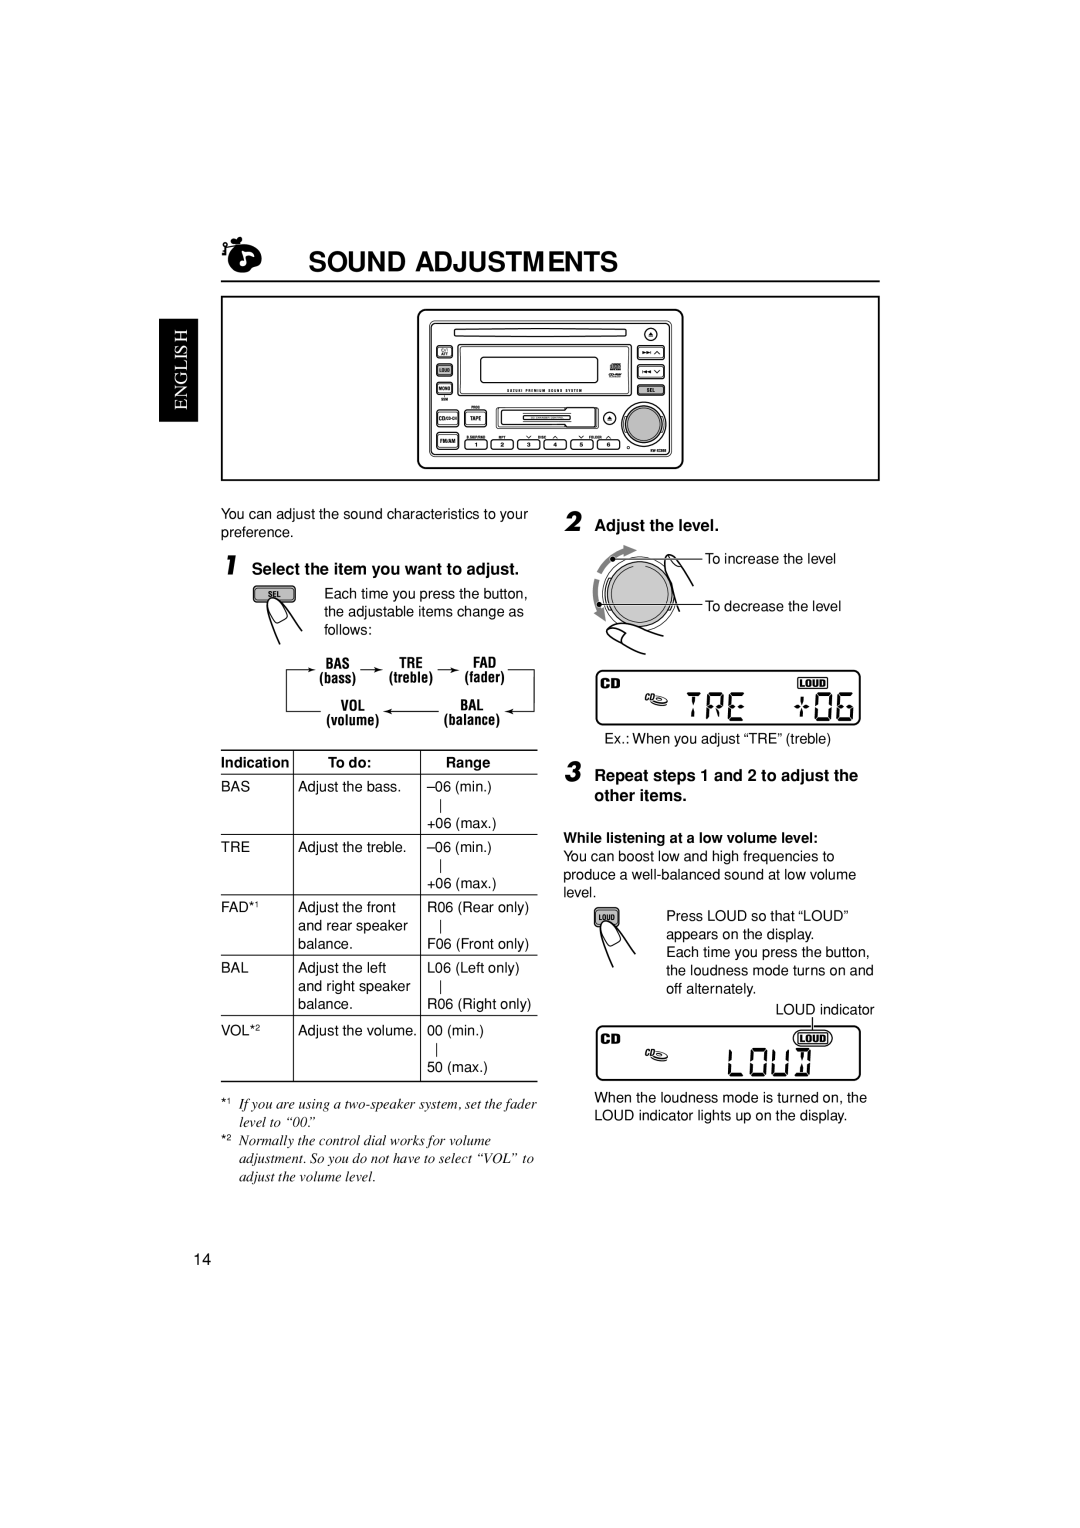 JVC LVT1139-002A, KW-XC888 manual Sound Adjustments, Select the item you want to adjust, Adjust the level 